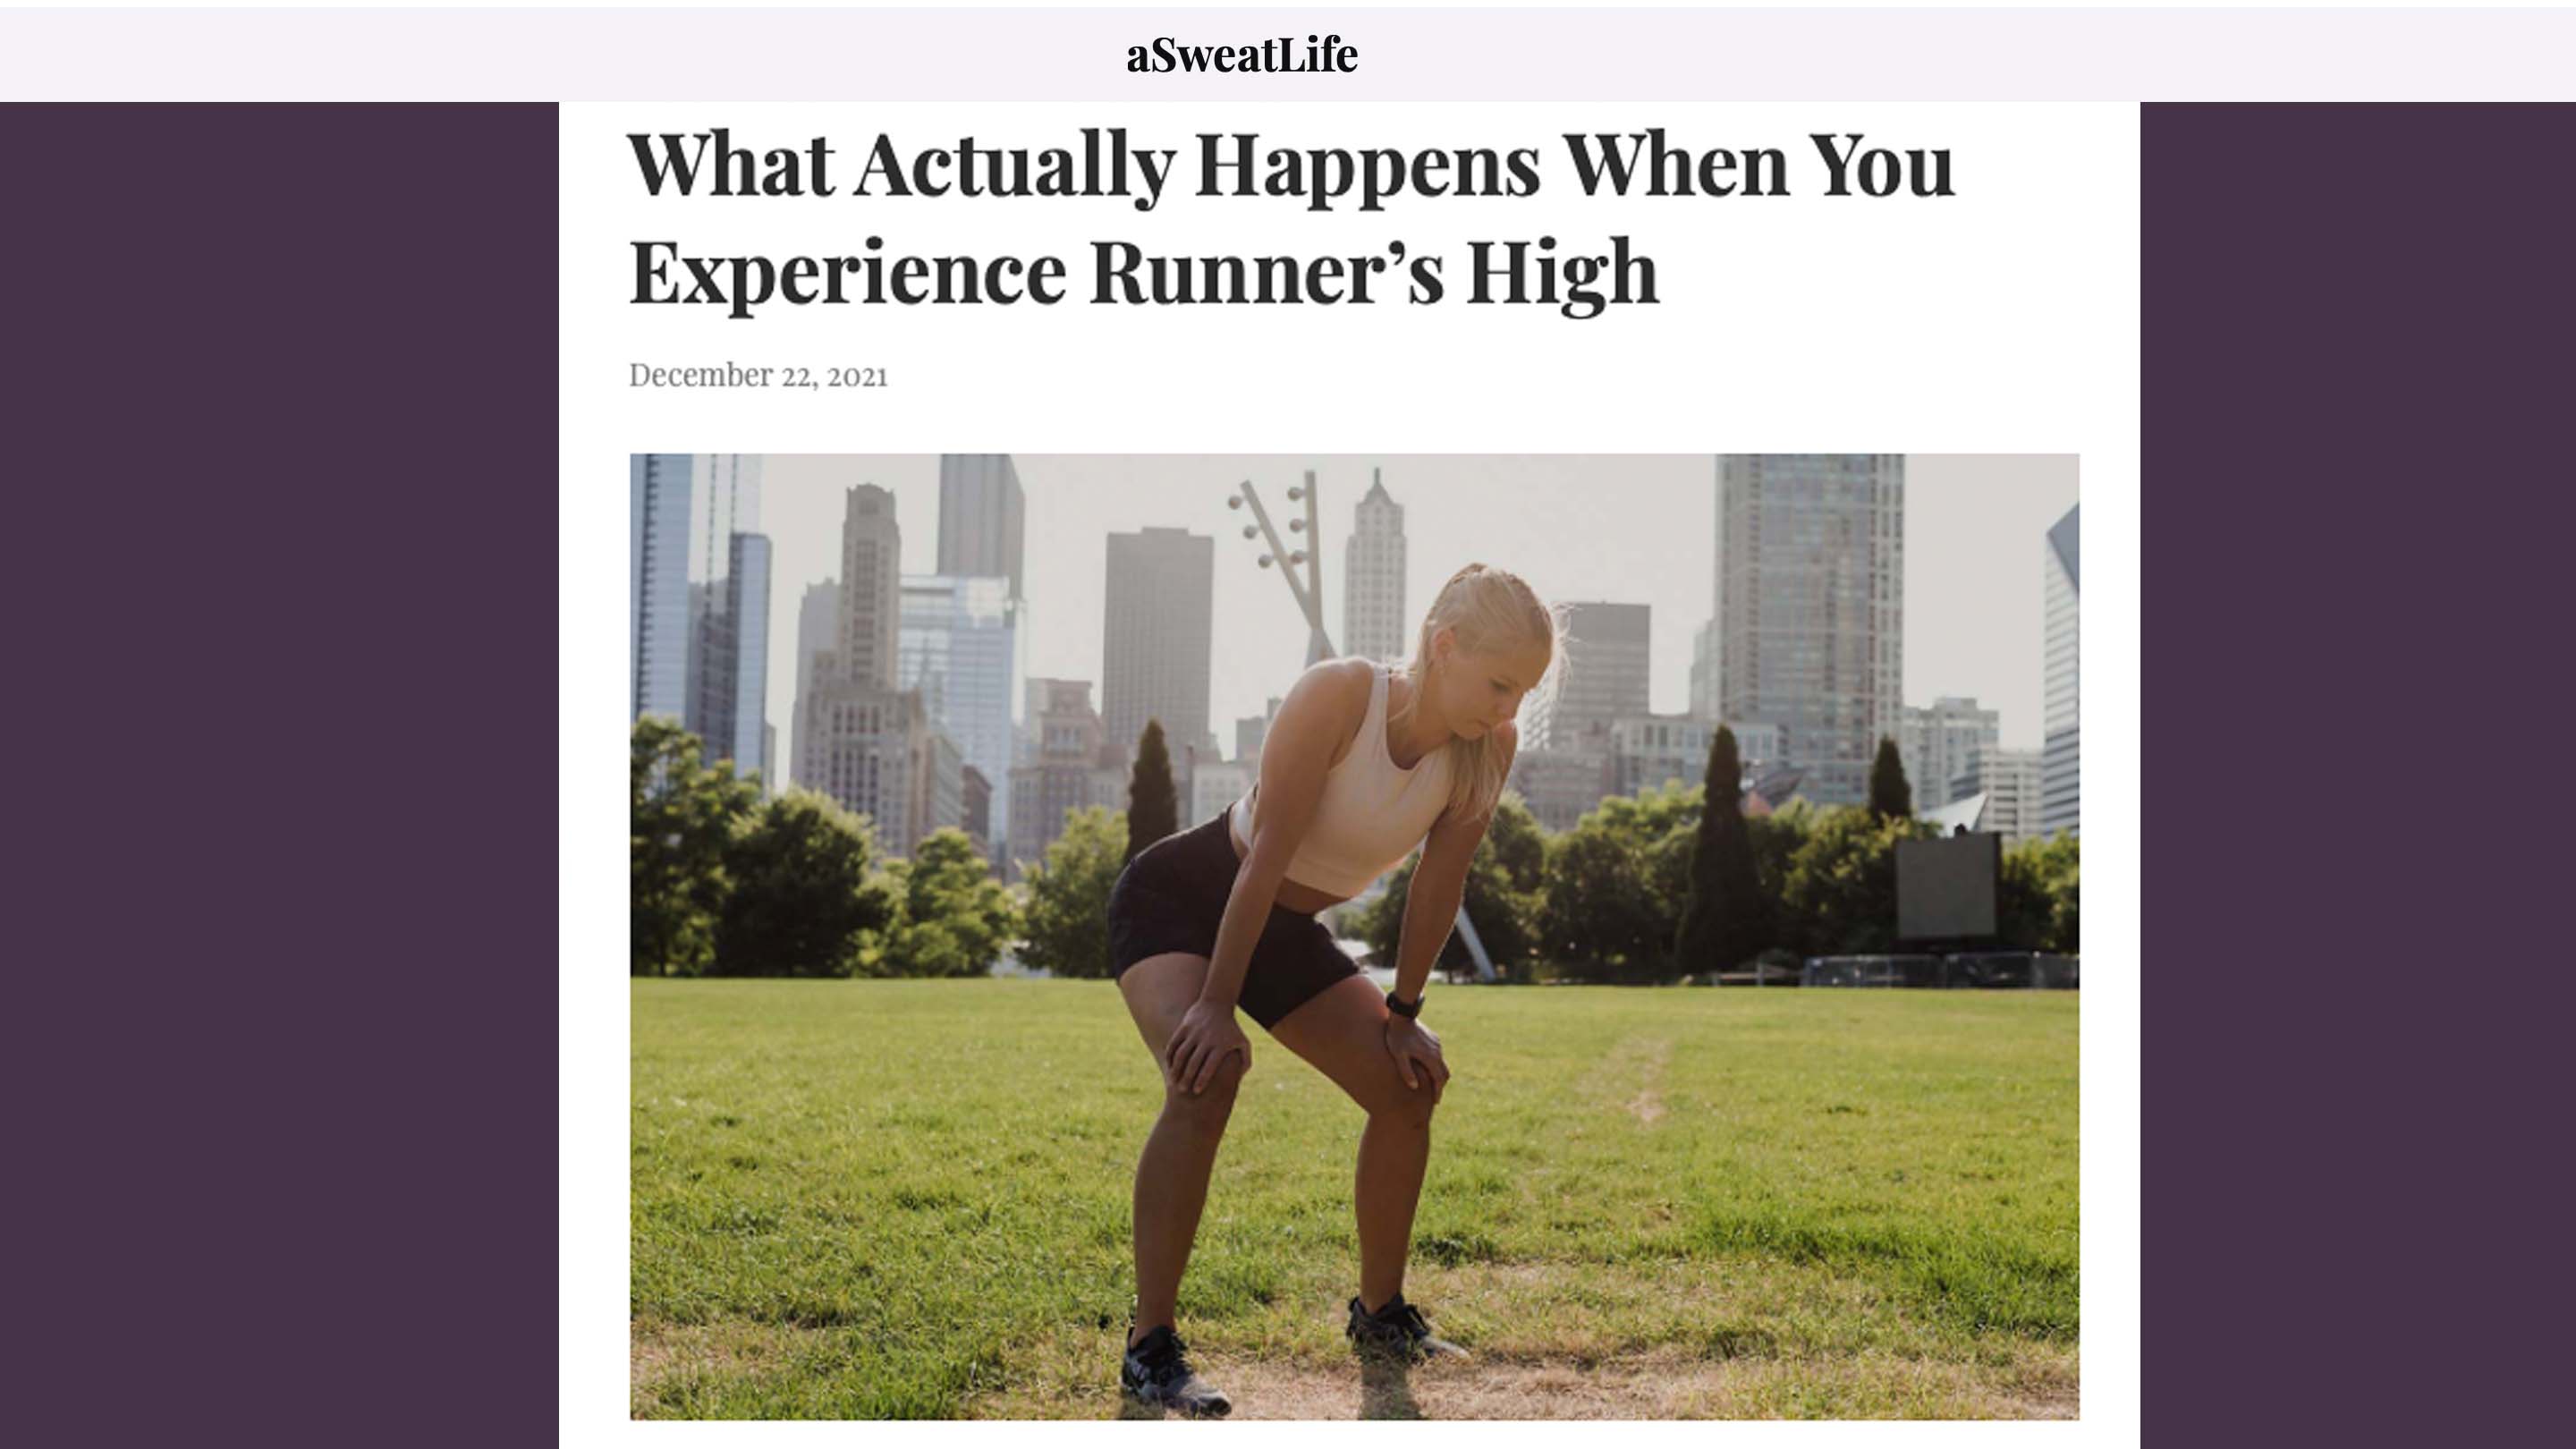 What Actually Happens When You Experience Runner’s High